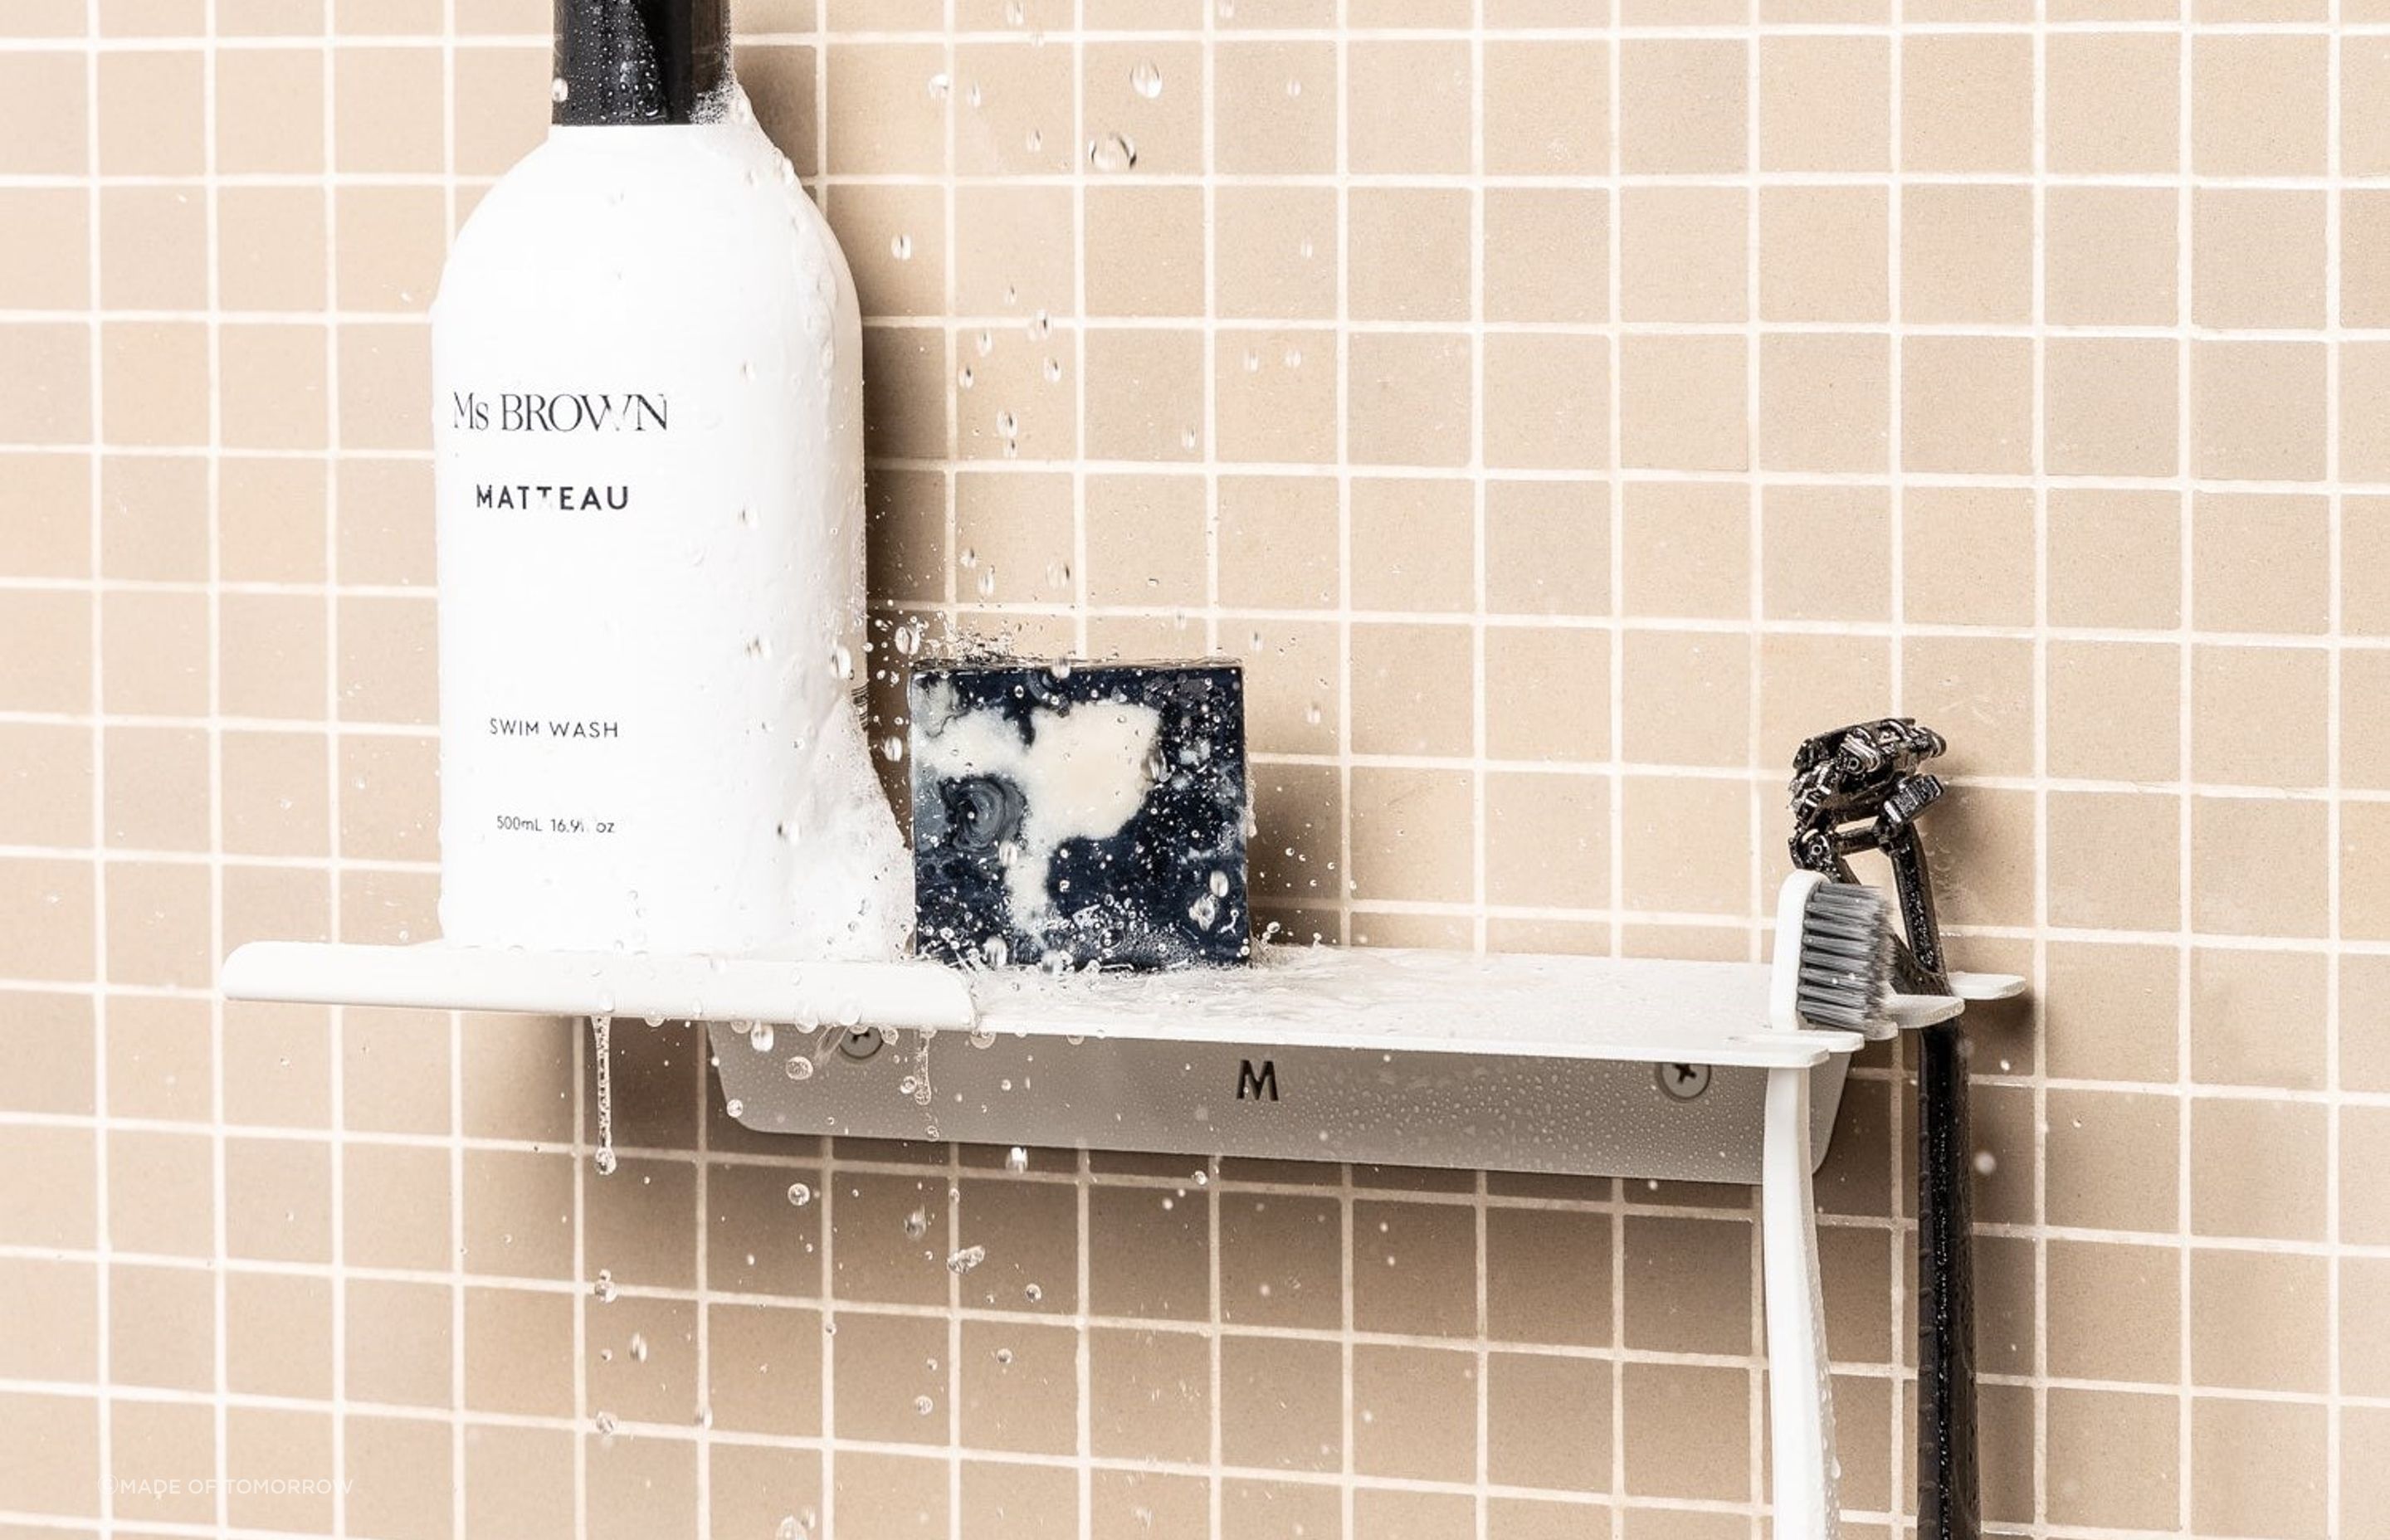 A shower shelf option like the Fold Shower Shelf is easy to install and can accommodate a range of different toiletries.